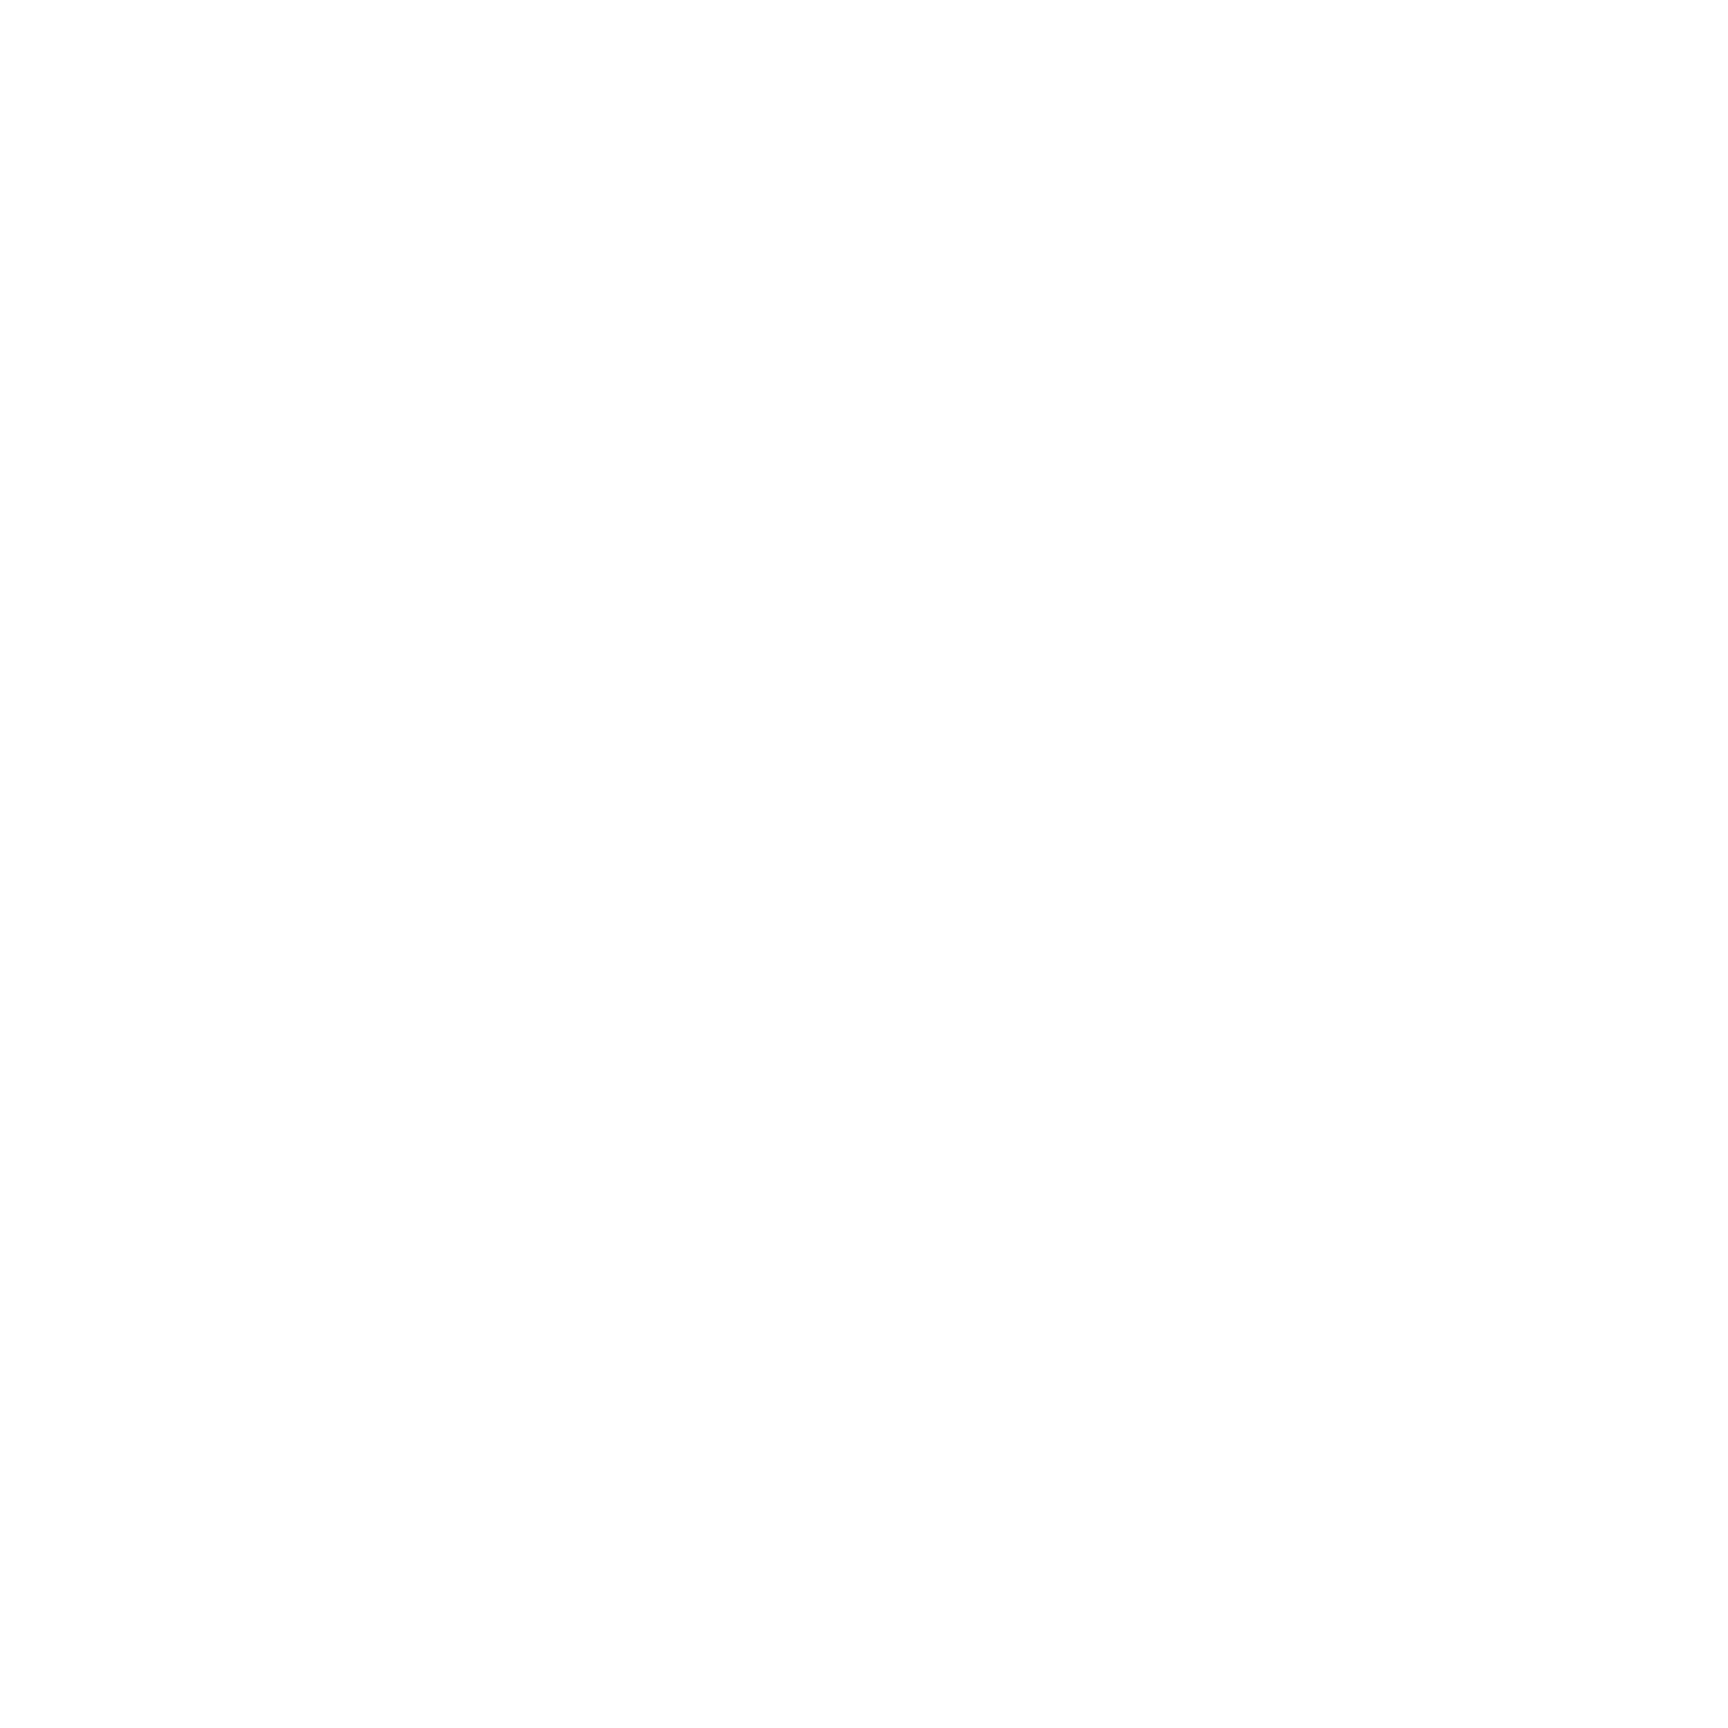 An icon of a globe